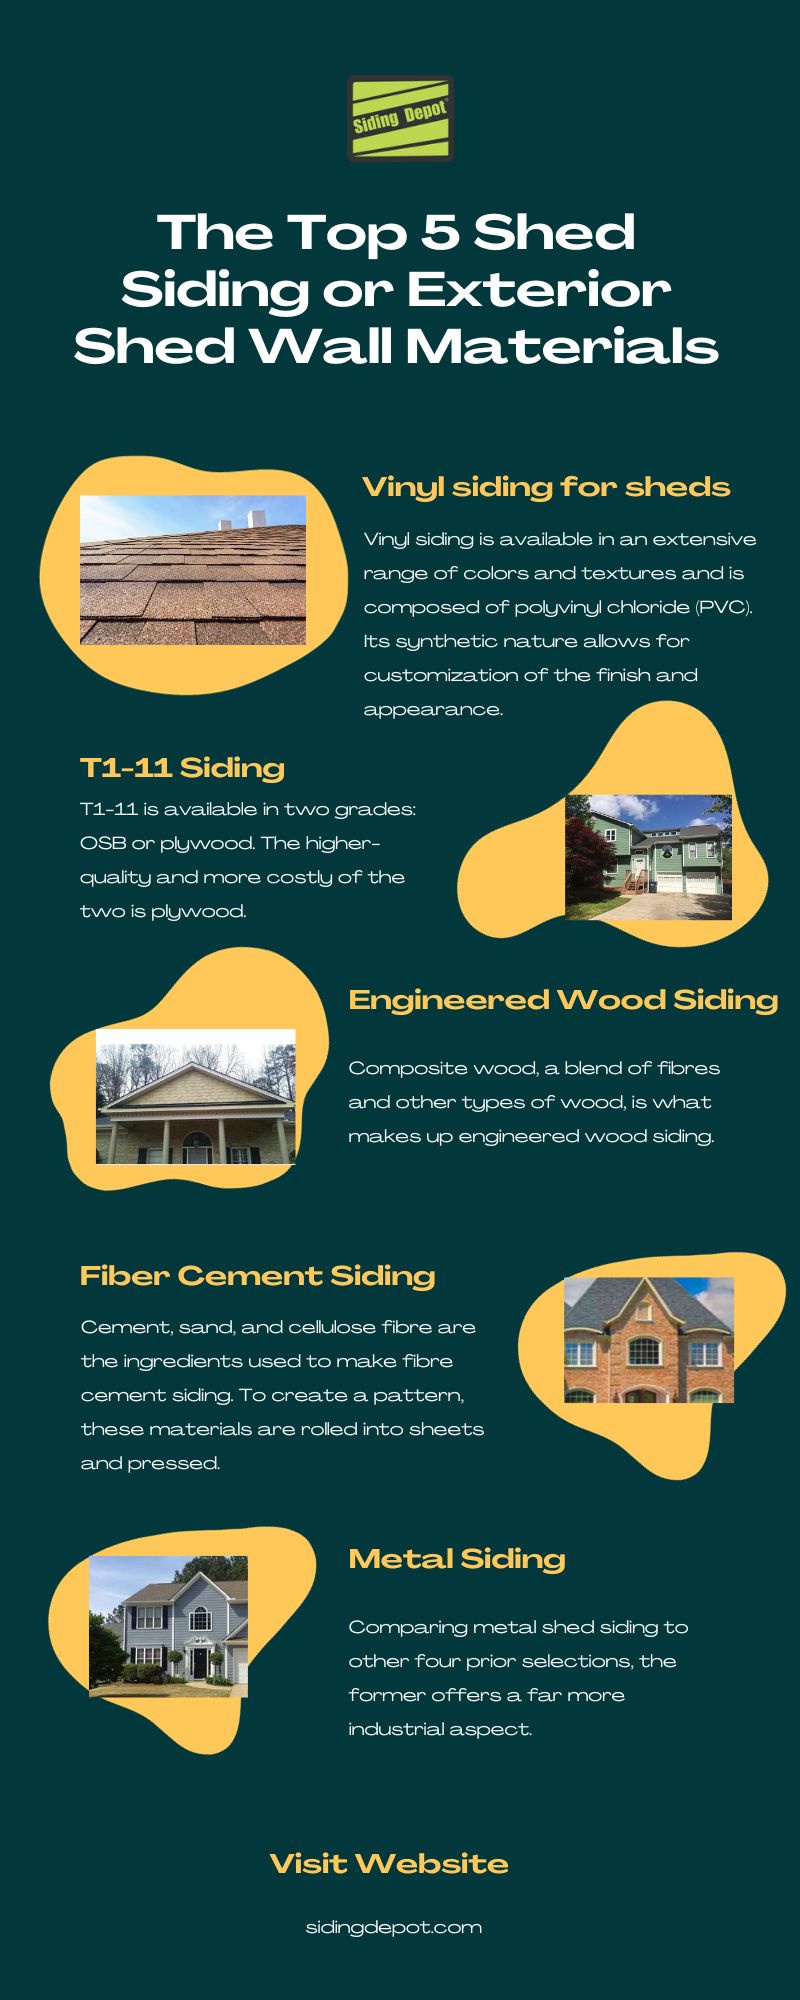 The Top 5 Shed Siding or Exterior Shed Wall Materials